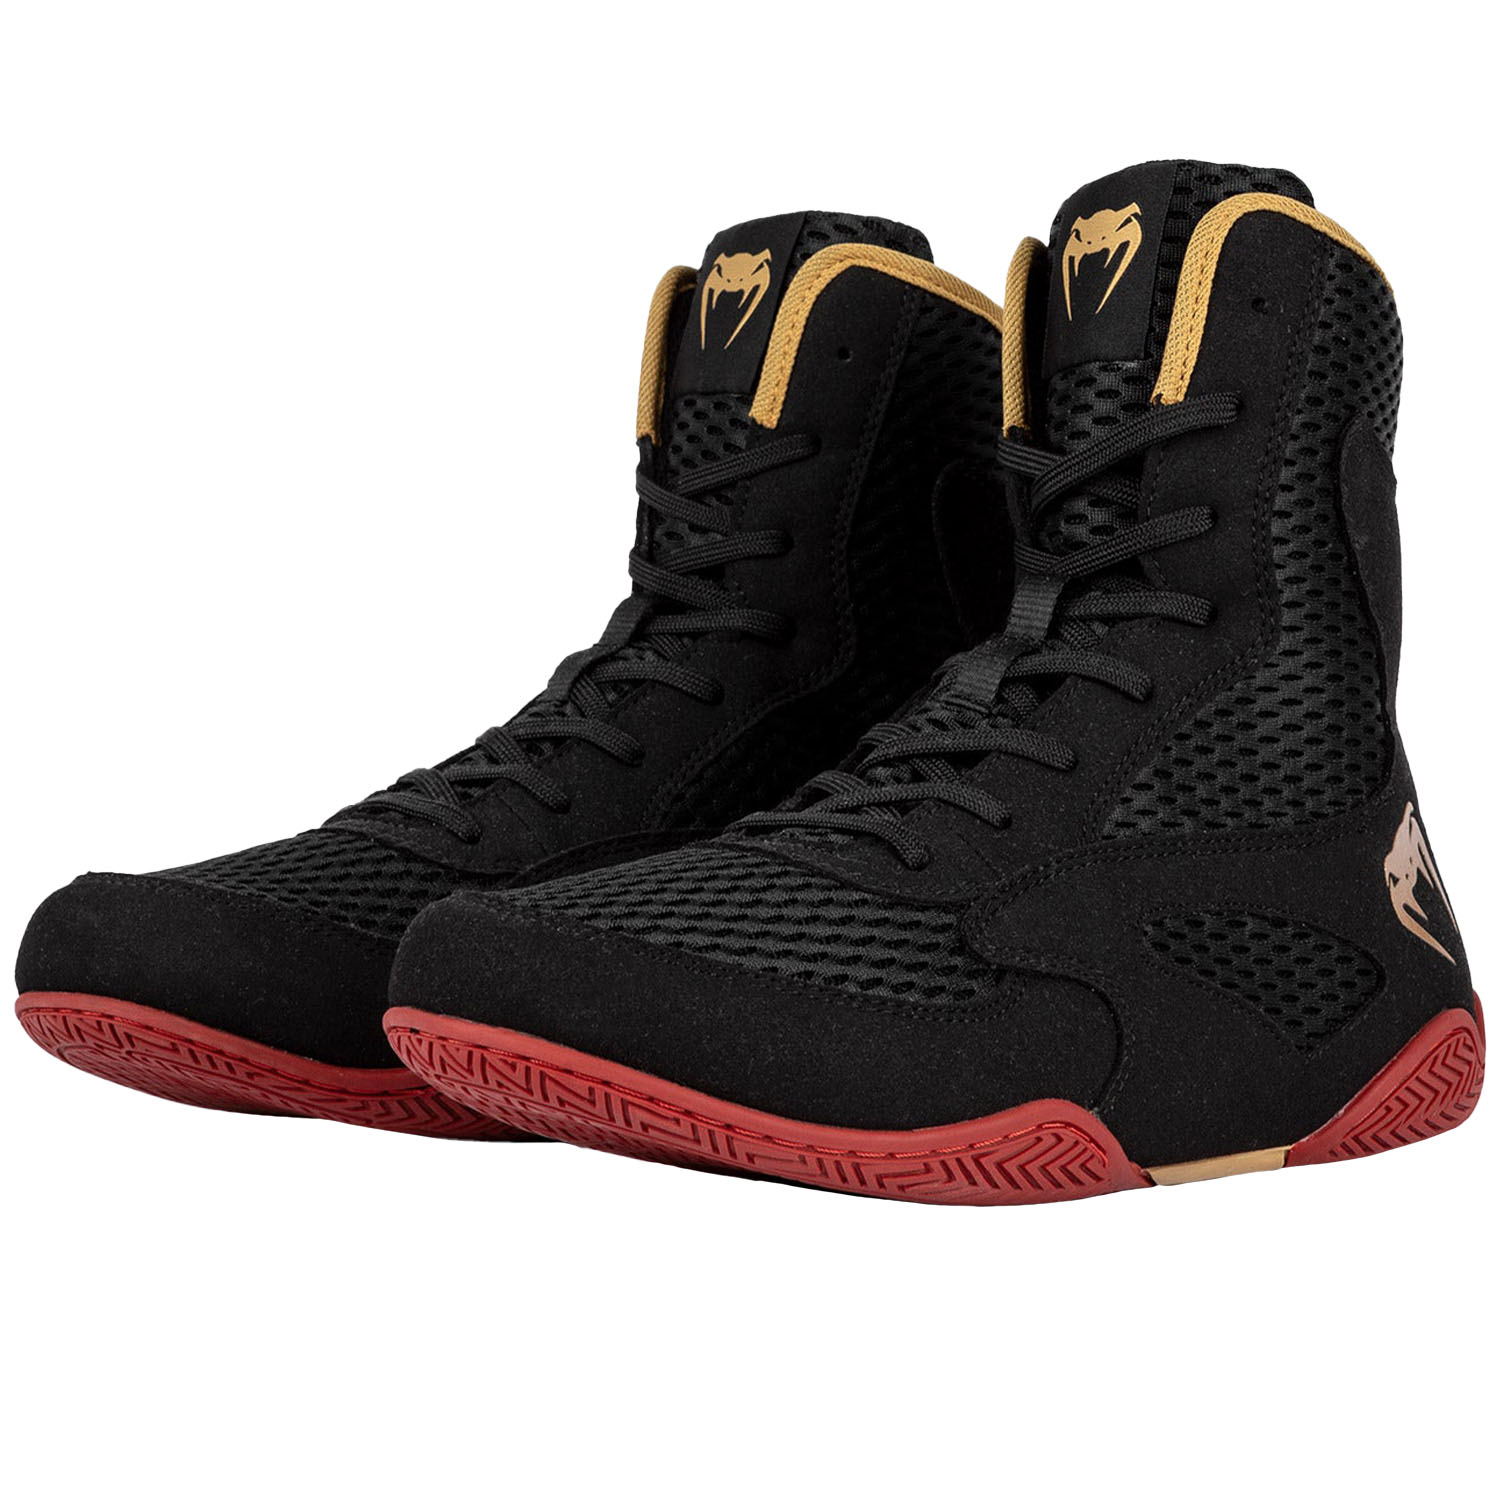 VENUM Boxing Shoes, Contender, black-red-gold